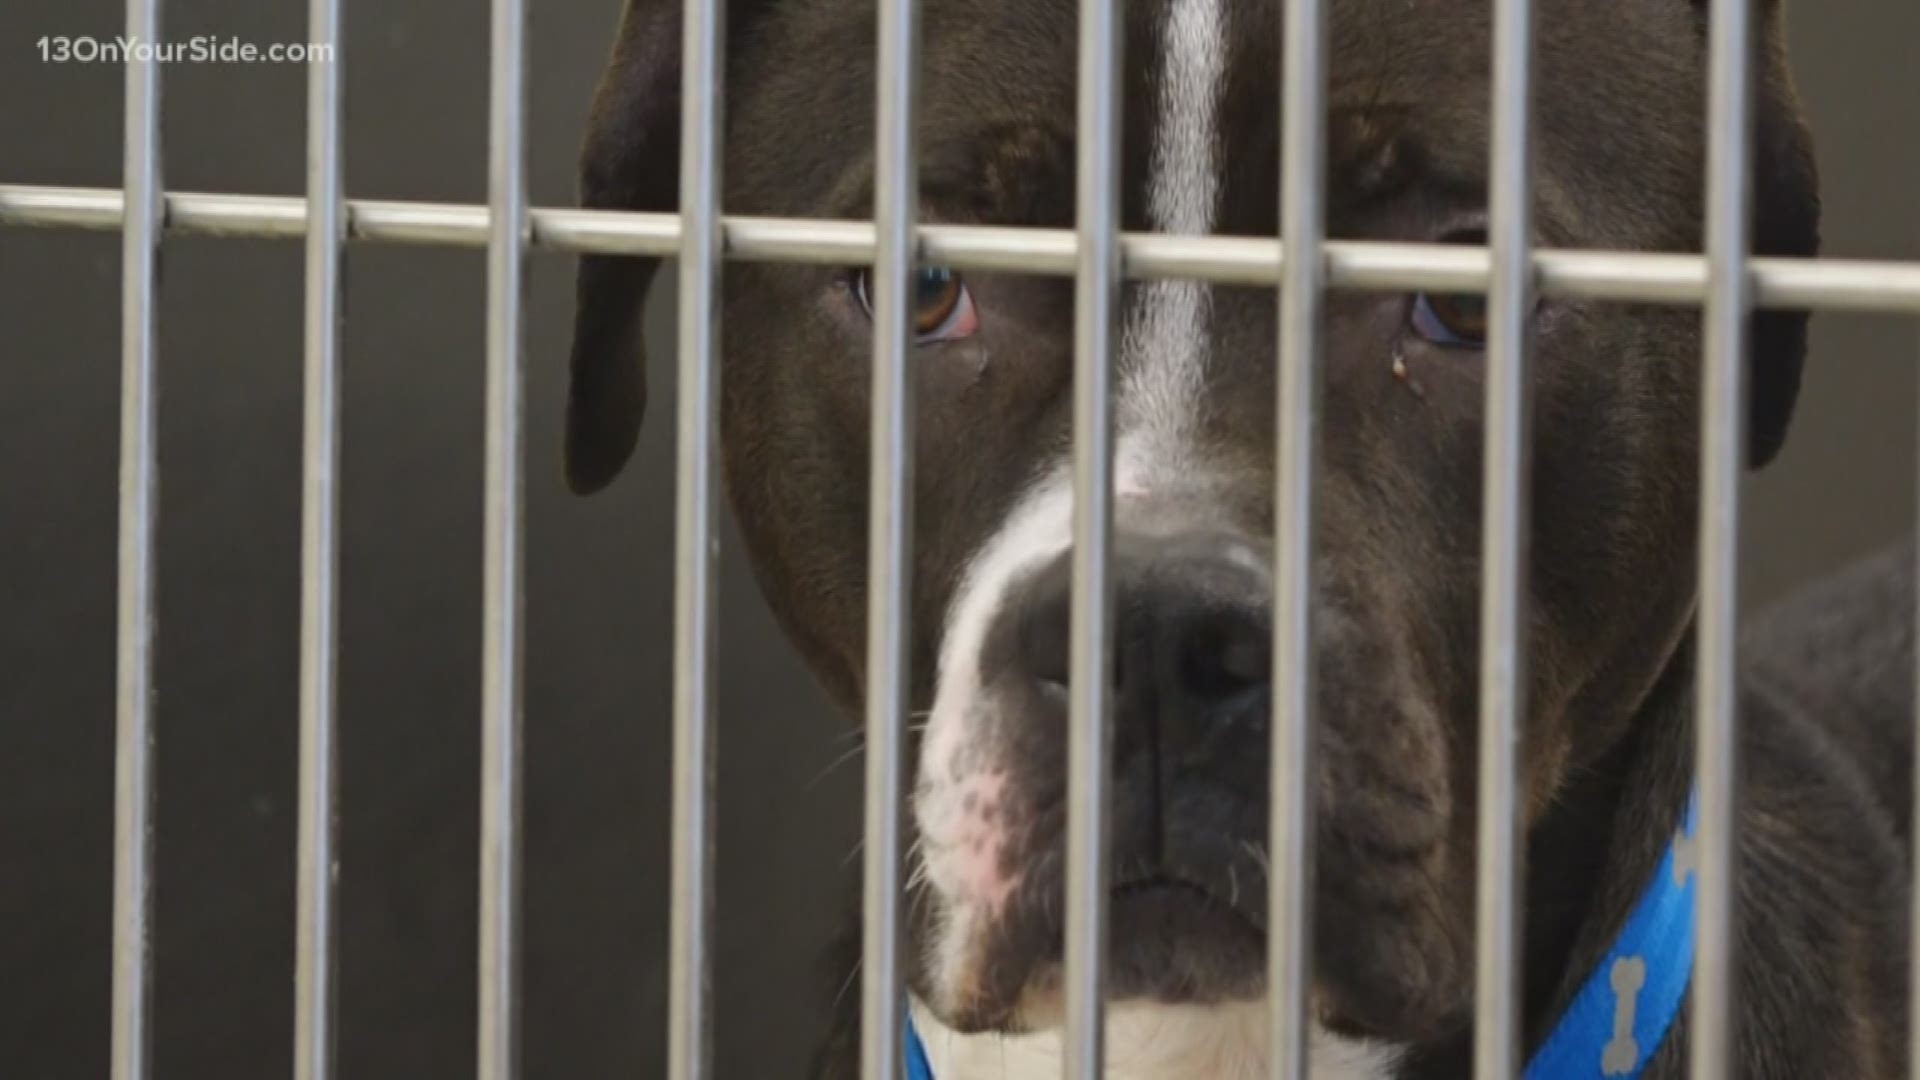 The Kent County Animal Shelter said 39 dogs and 22 cats were adopted throughout the event.